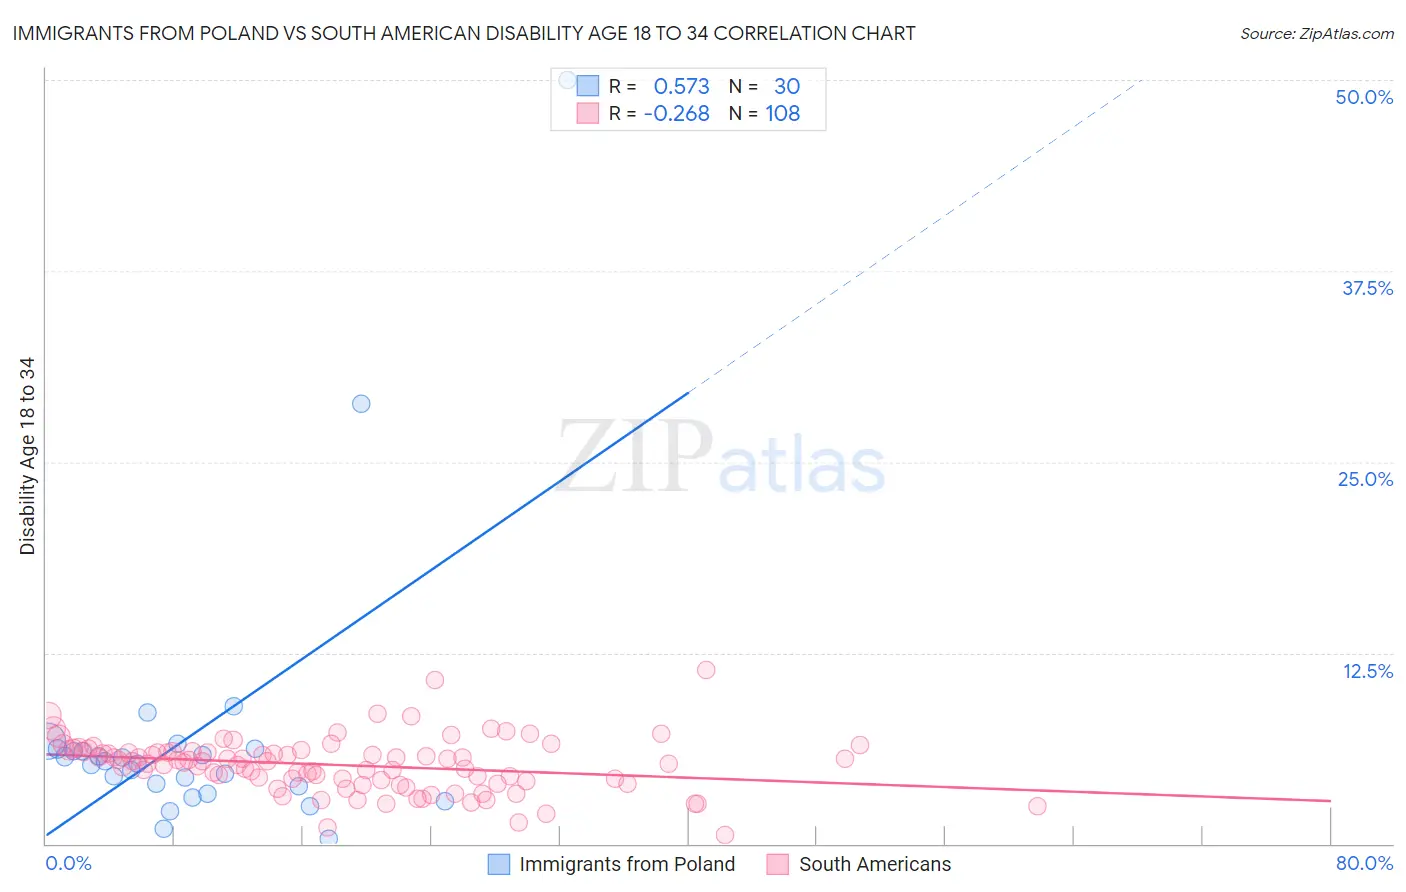 Immigrants from Poland vs South American Disability Age 18 to 34